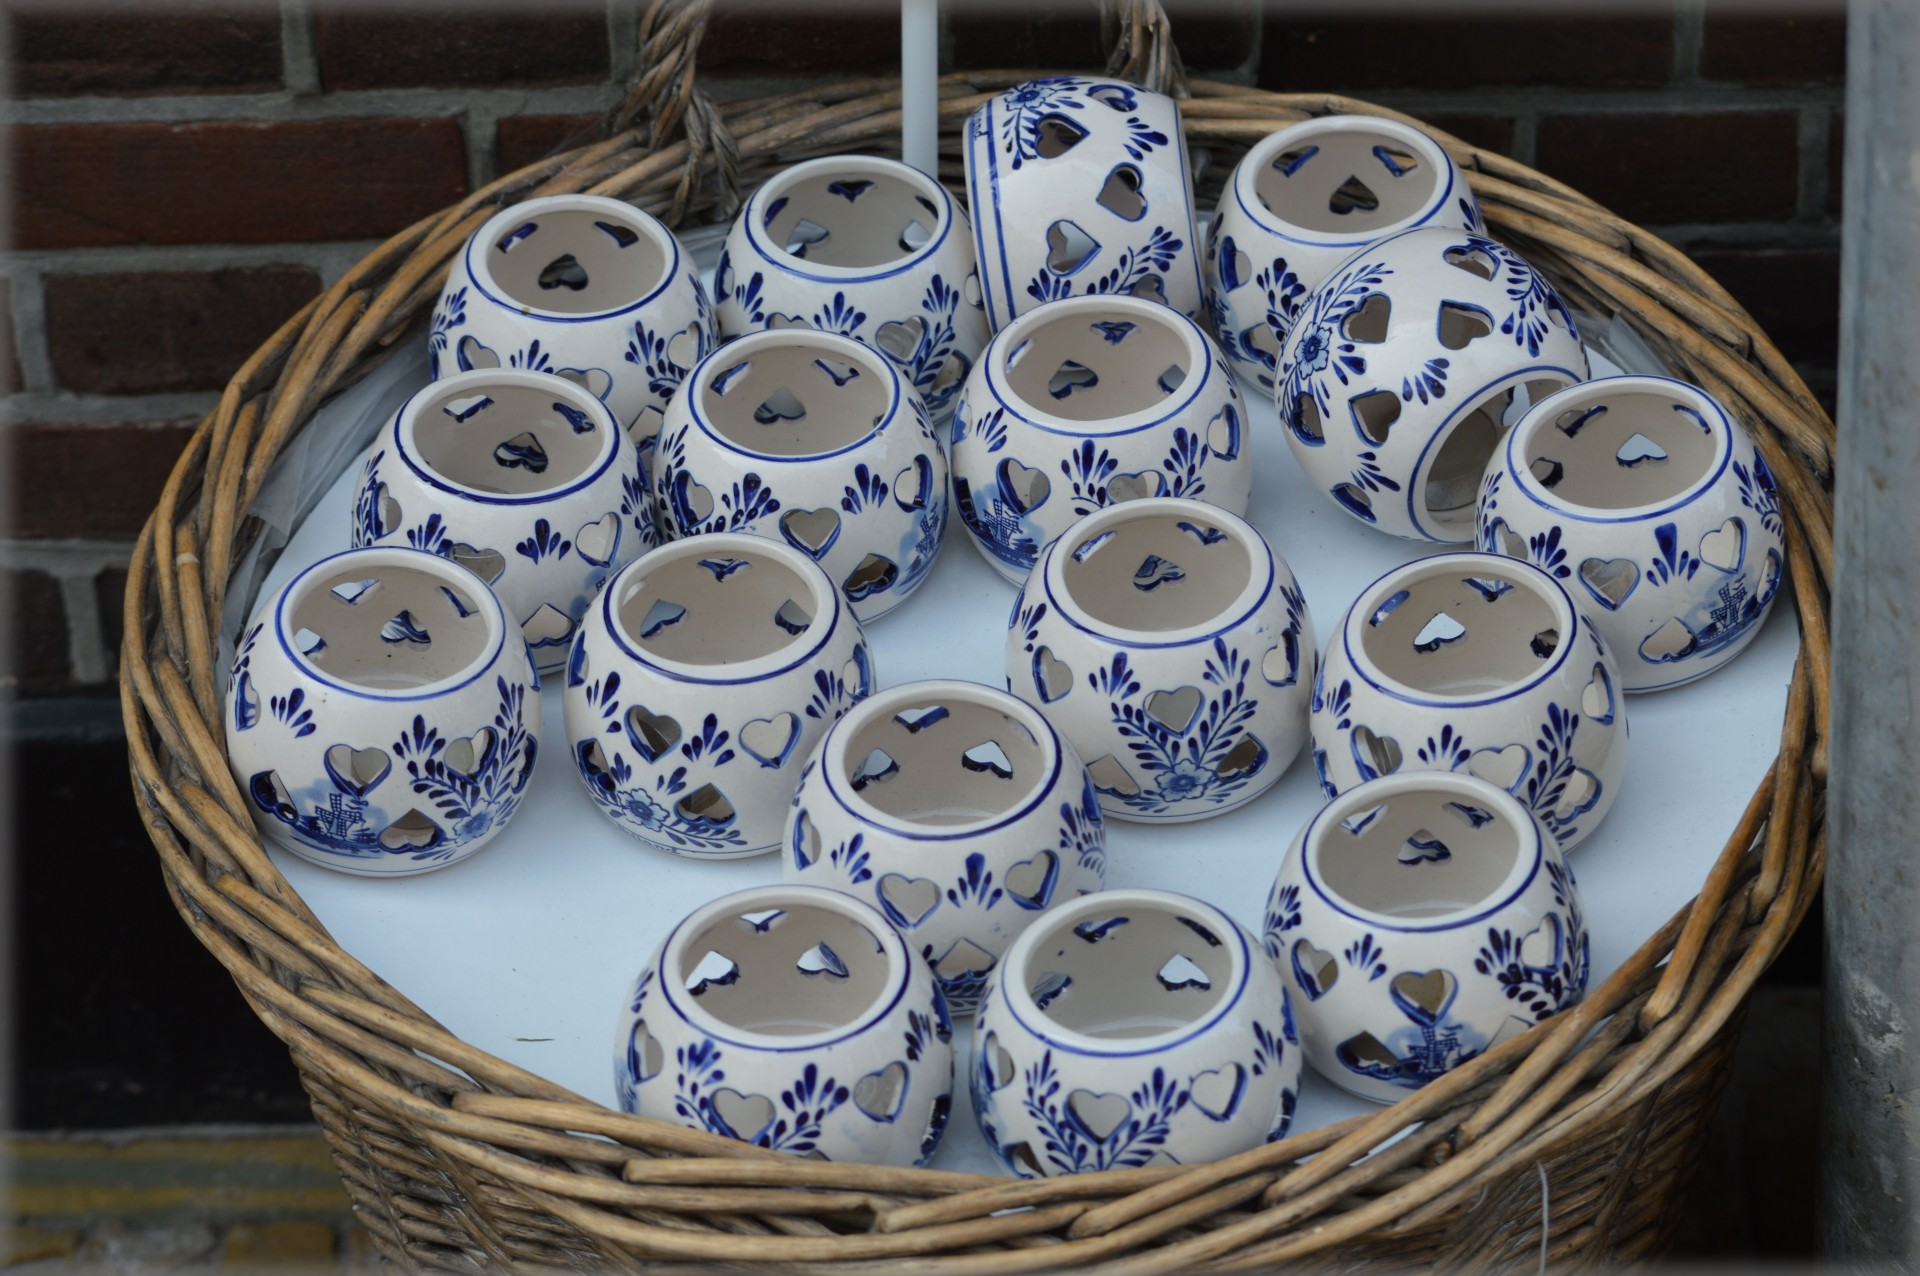 Porcelain from Holland